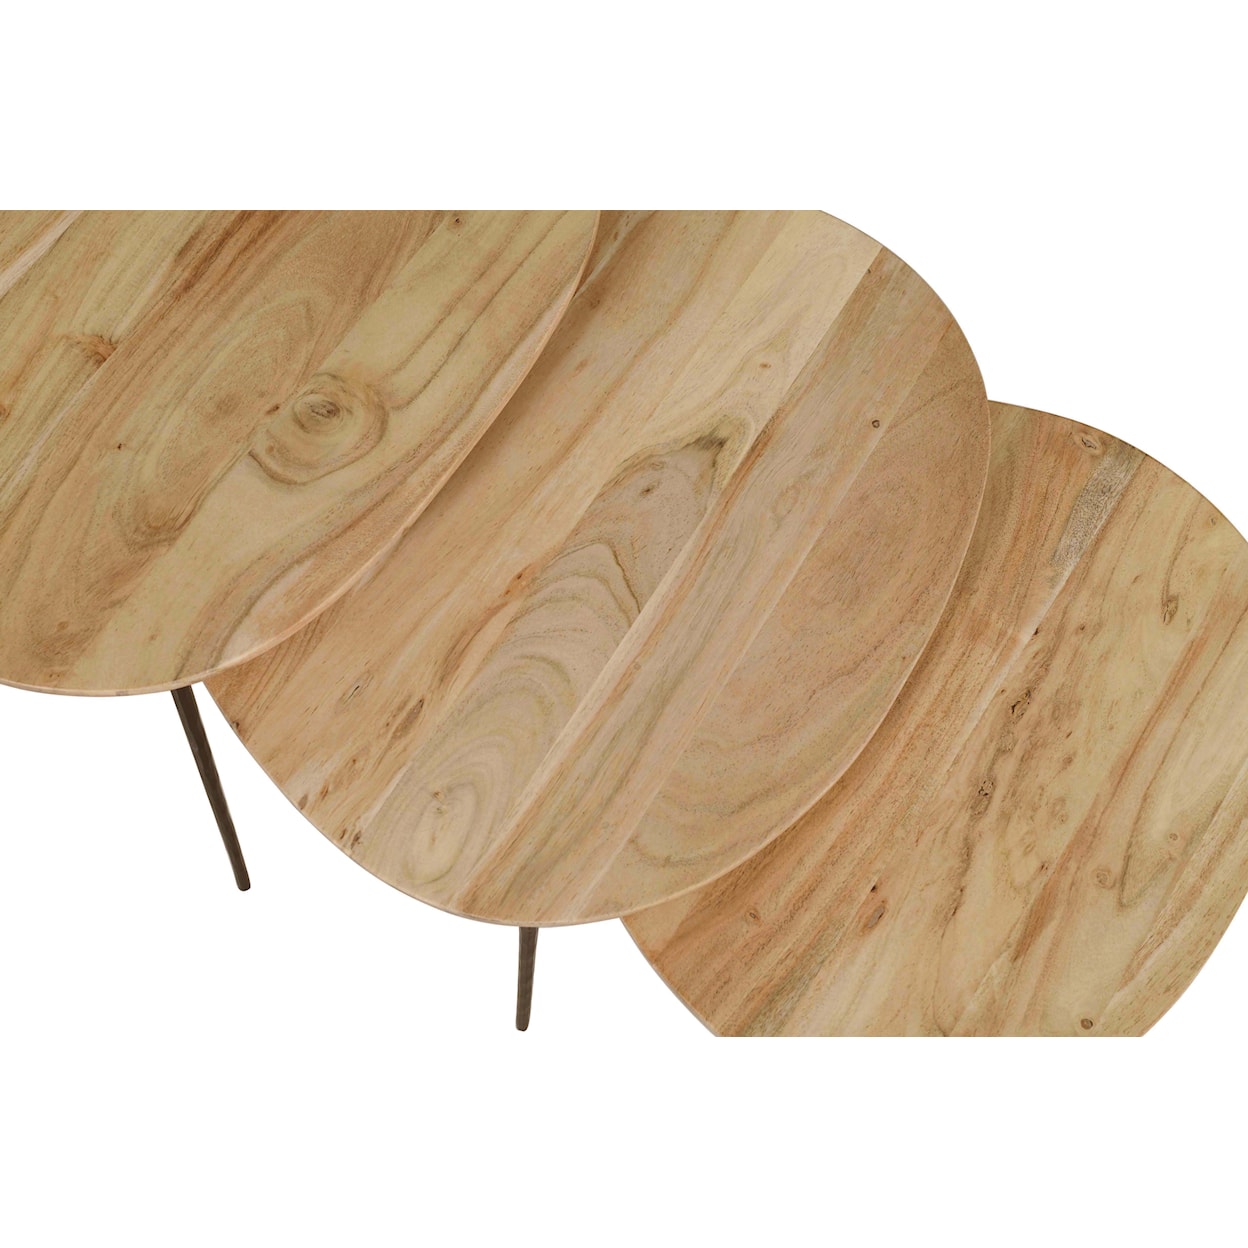 VFM Signature Reeves Nesting Table - Set of 3 - Natural